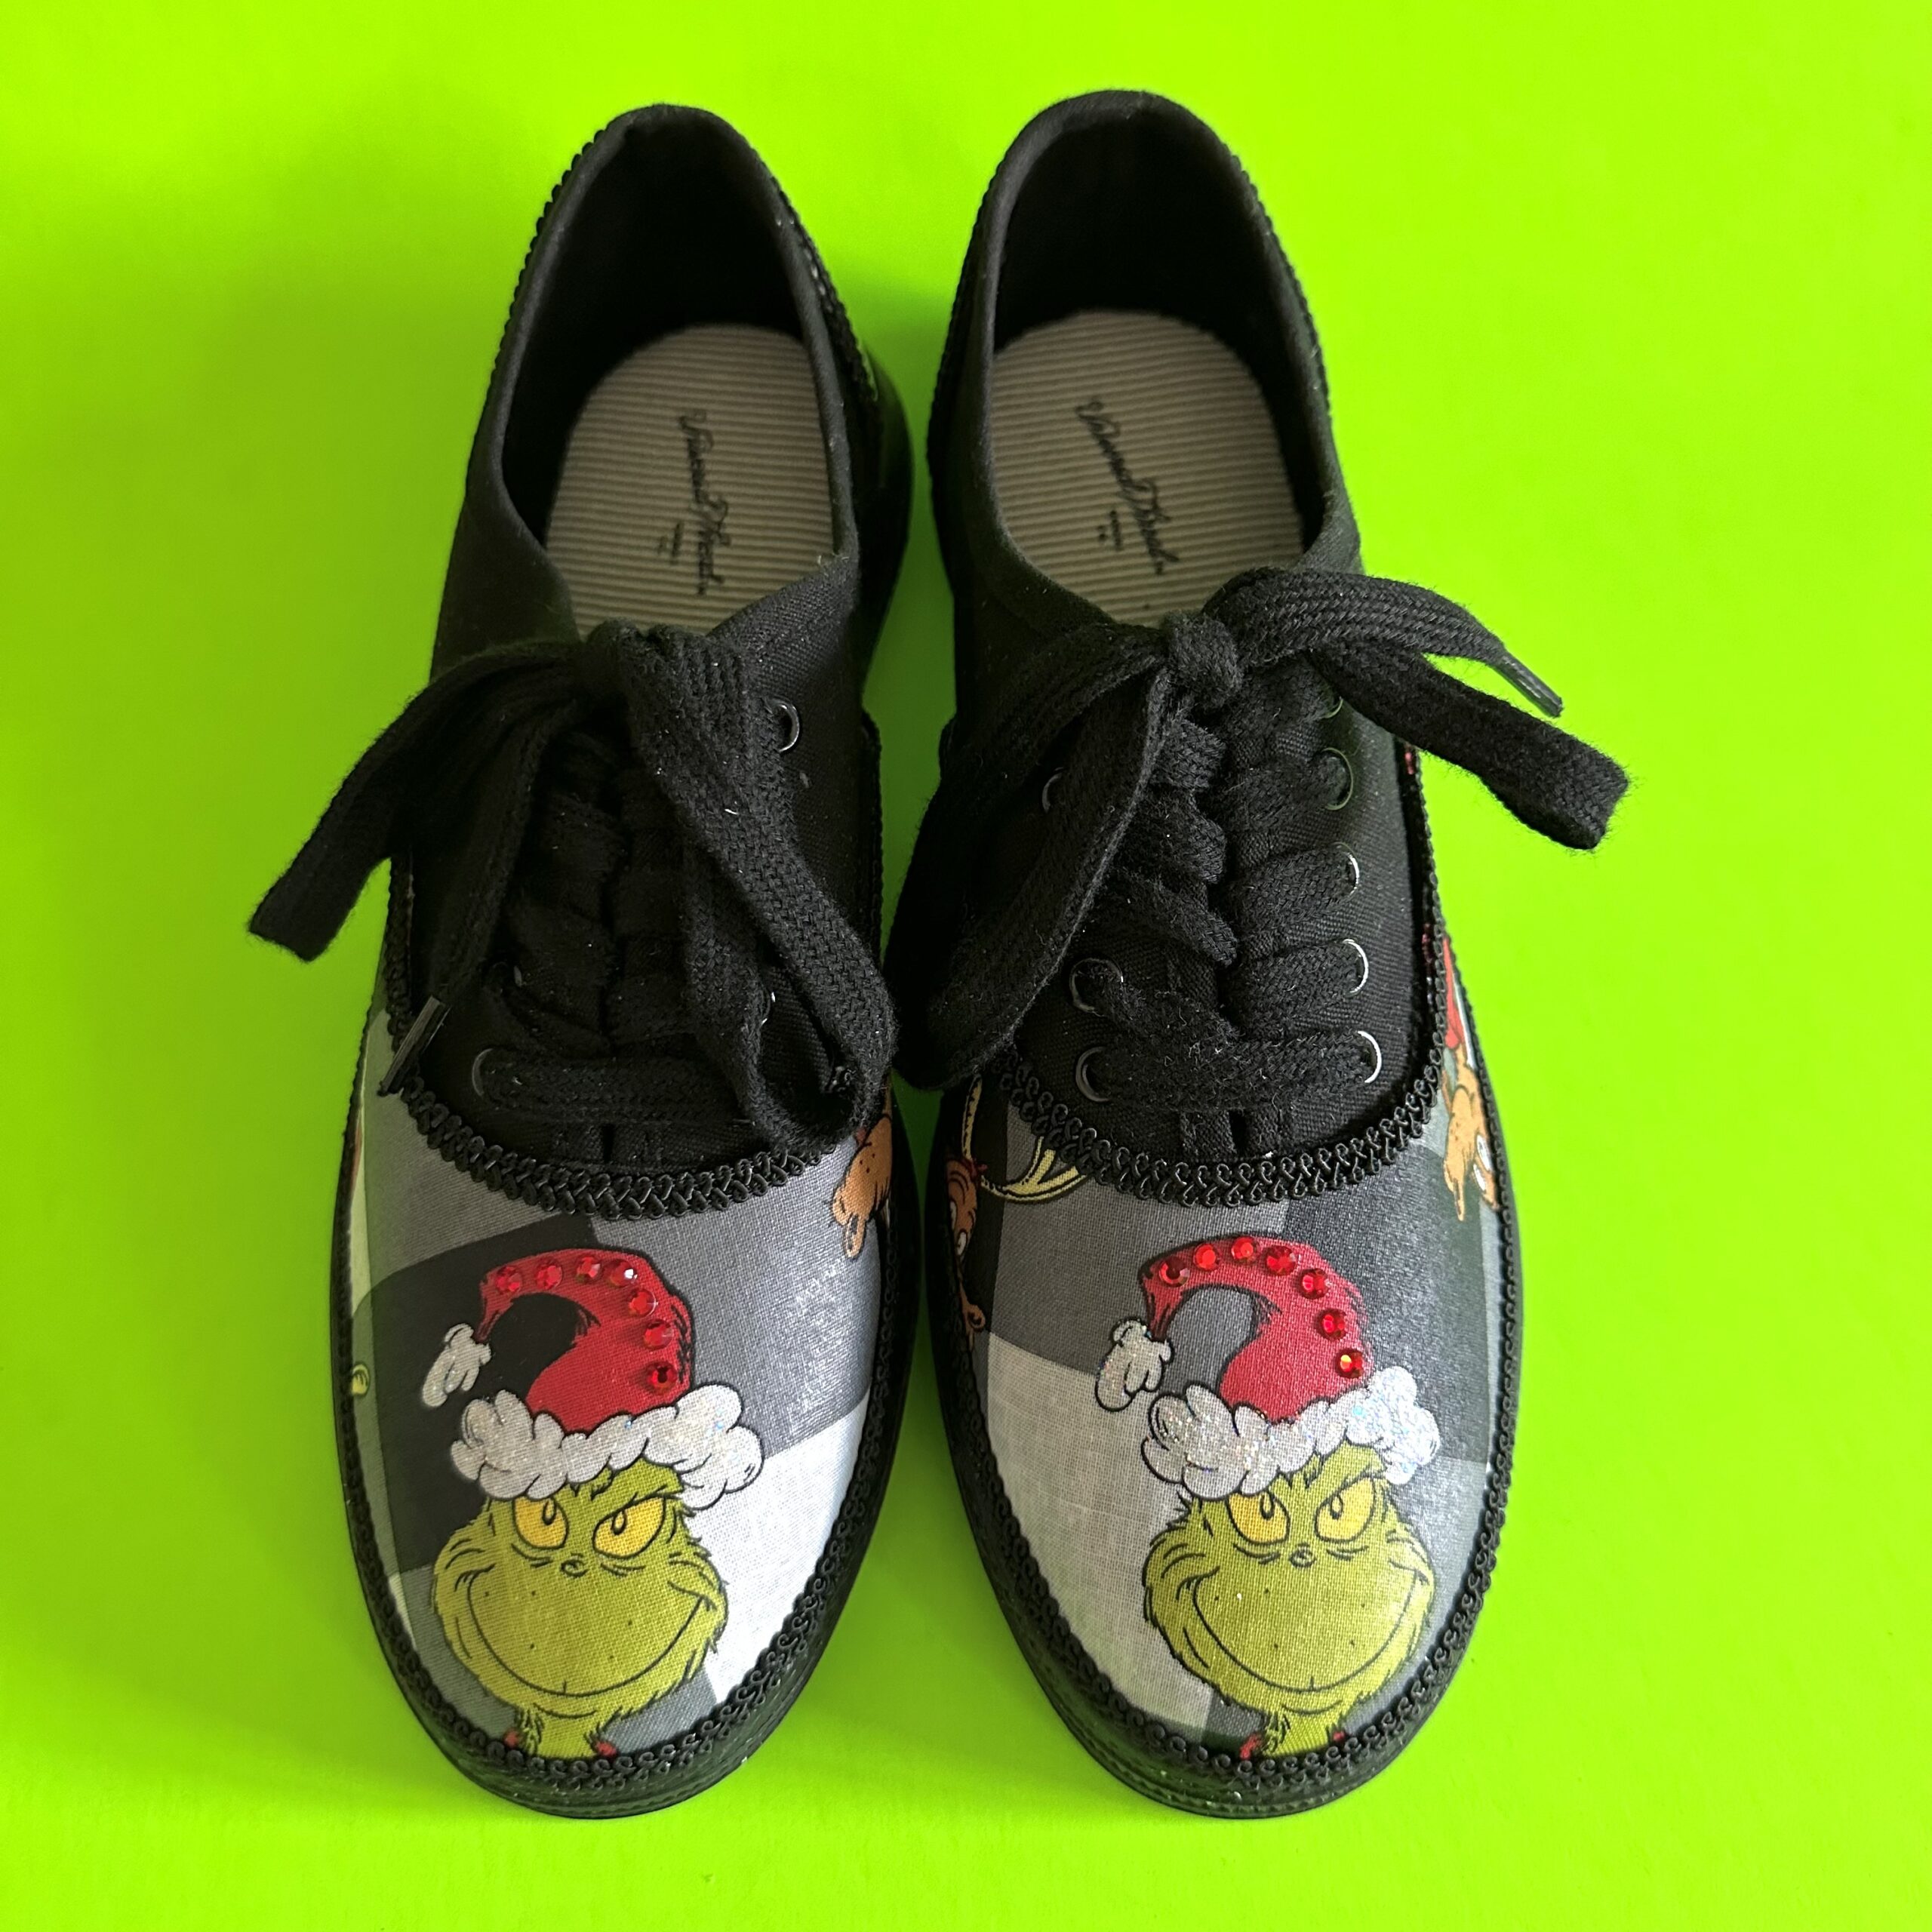 DIY Character Shoes with Napkins and Fabric Mod Podge - CATHIE